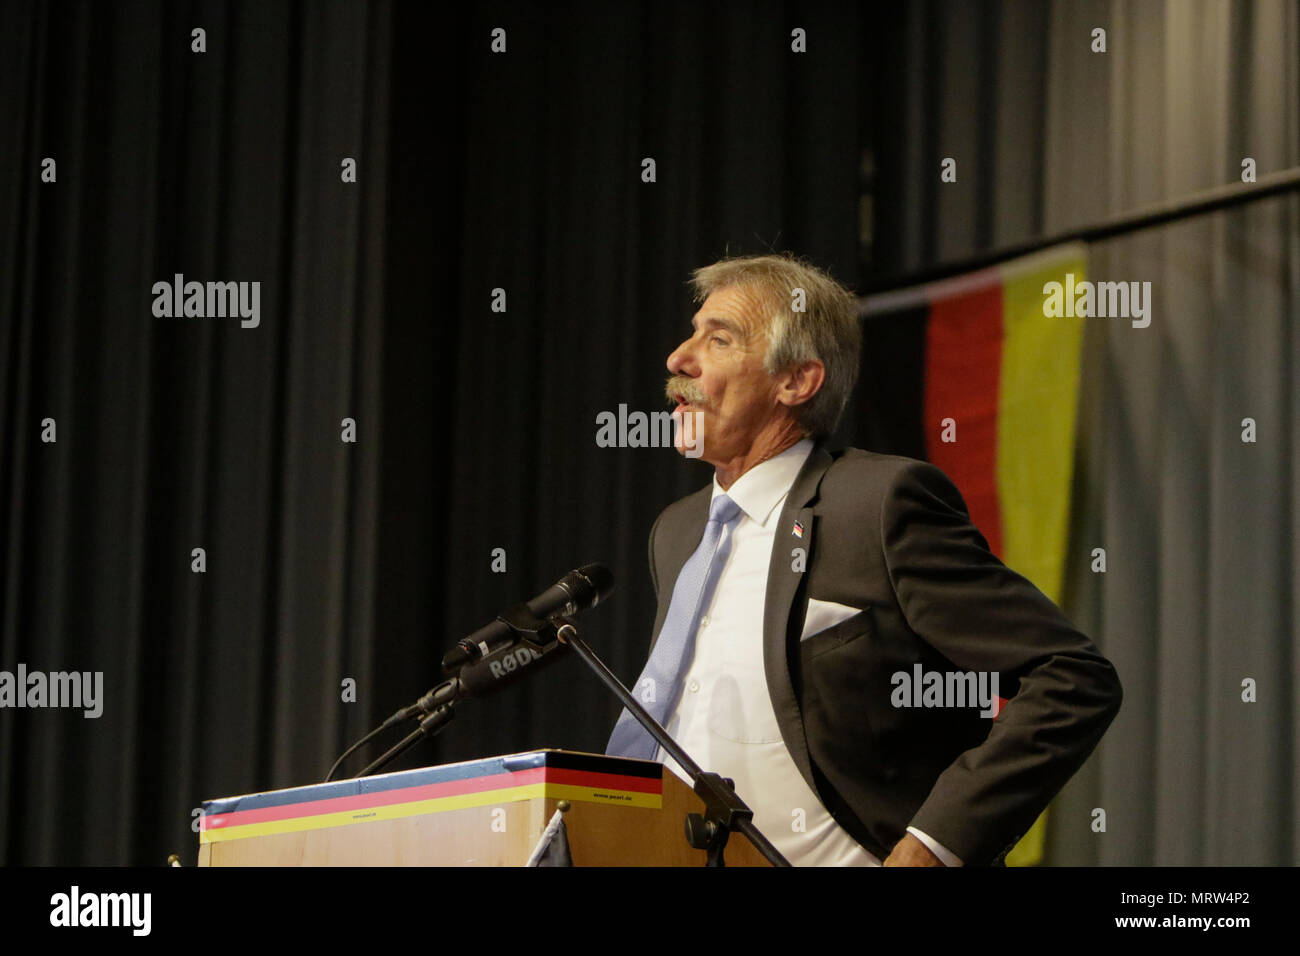 Jockgrim, Germany. 26th May, 2018. The parliamentary leader of the AfD party in the Landtag (parliament) of Rhineland-Palatinate Uwe Junge speaks on the podium. The parliamentary group of the right-wing populist AfD (Alternative for Germany) party of Rhineland-Palatinate celebrated the 2nd anniversary of their entry into the Rhineland-Palatinate state parliament in the 2016 state election in the South Palatinate city of Jockgrim. A counter-protest was organised by several groups outside the venue. Credit: Michael Debets/Pacific Pres/Alamy Live News Stock Photo